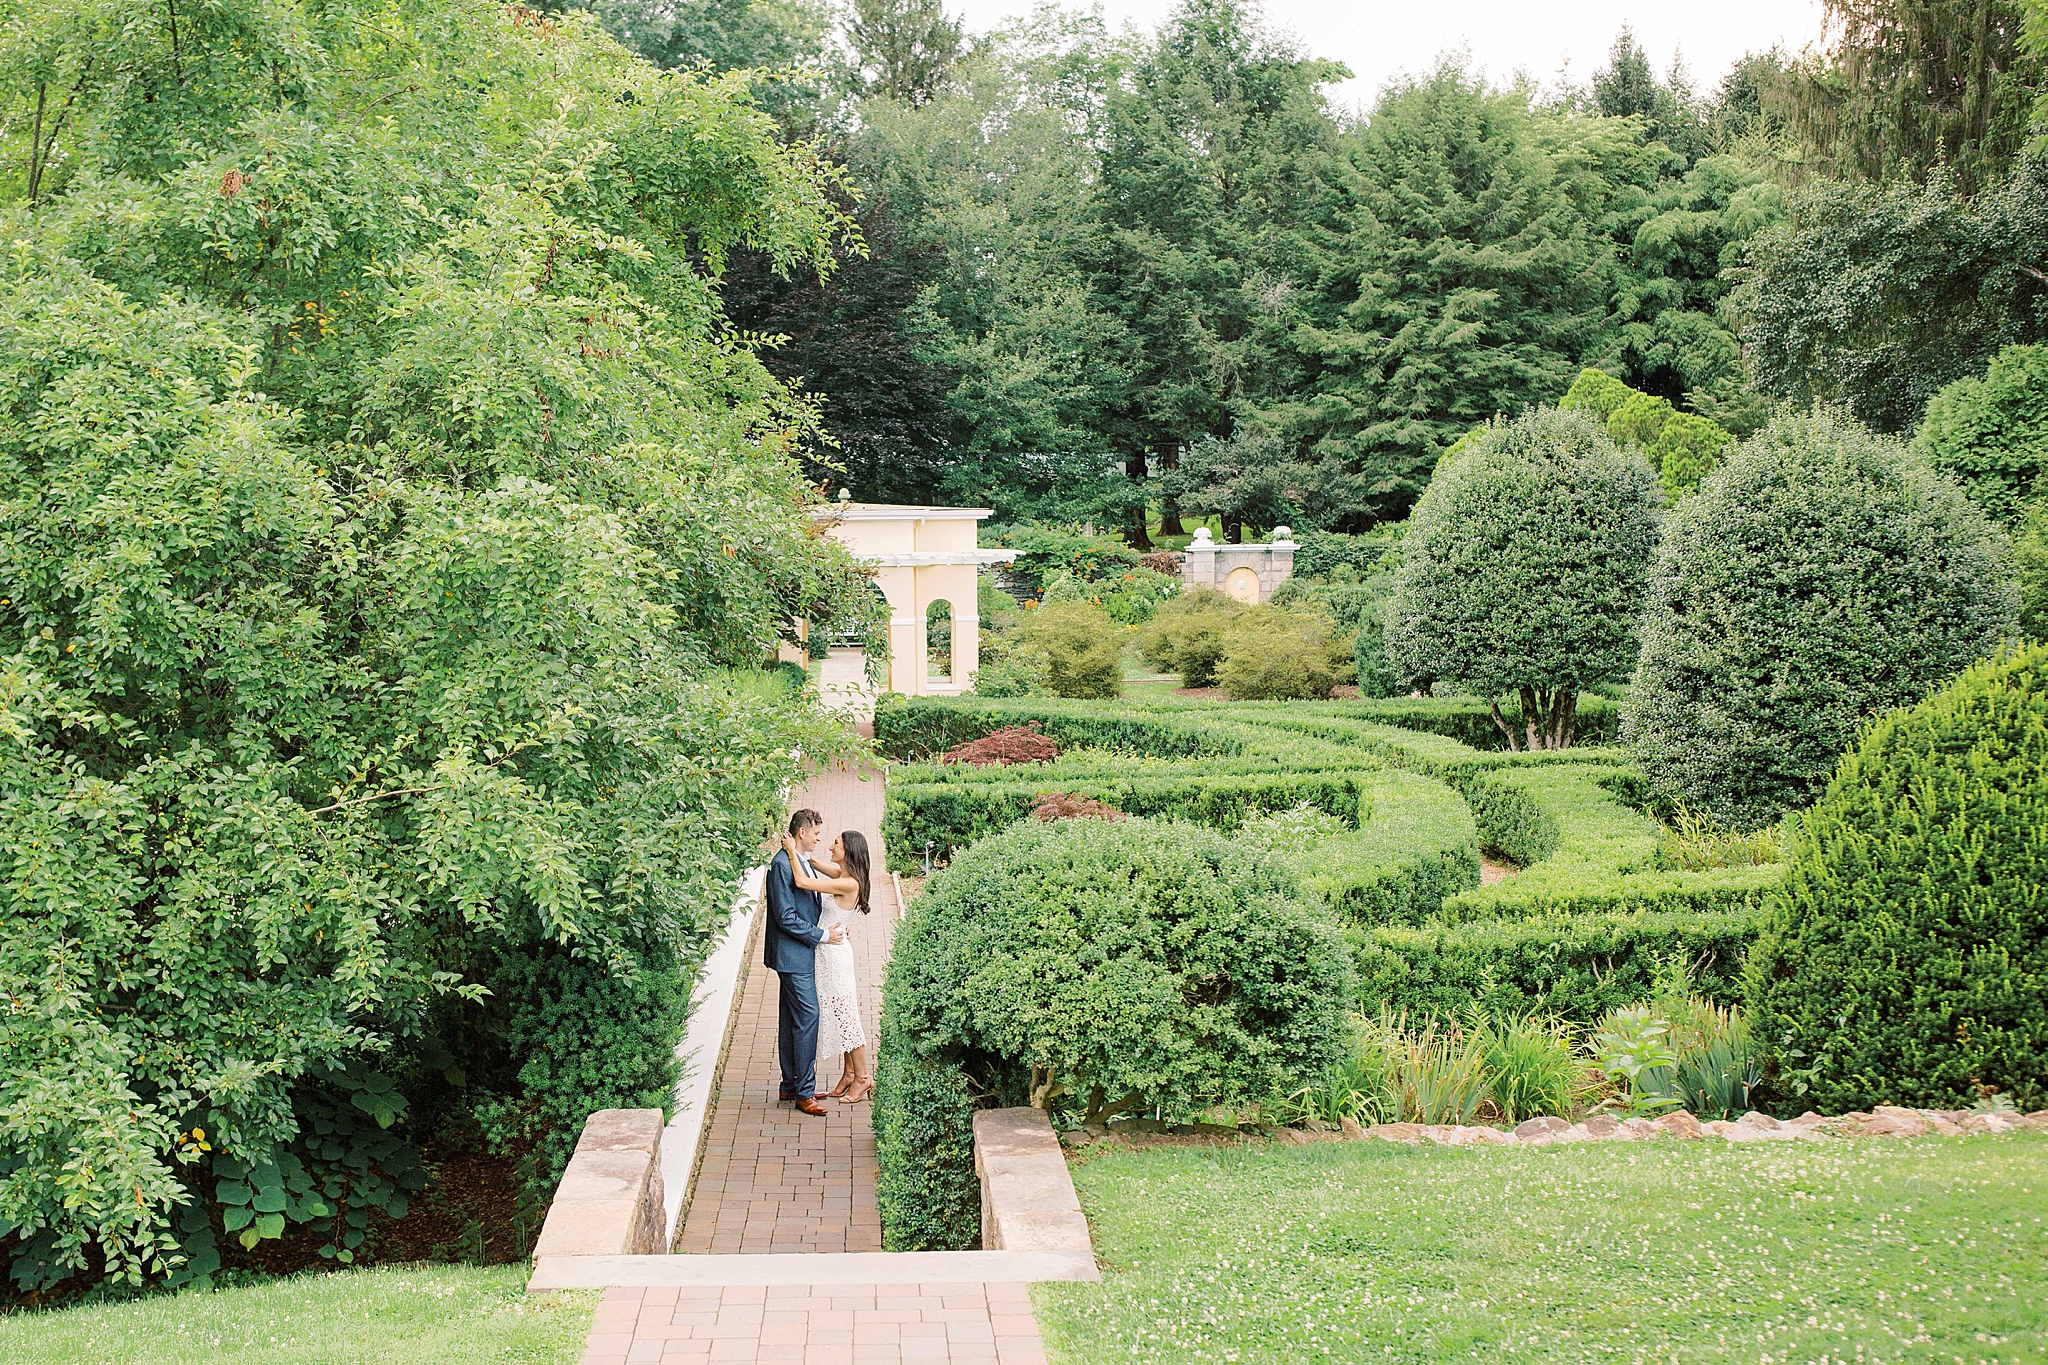 An elegant garden engagement session at Airlie Center in Warrenton, VA featuring a goldendoodle puppy. 